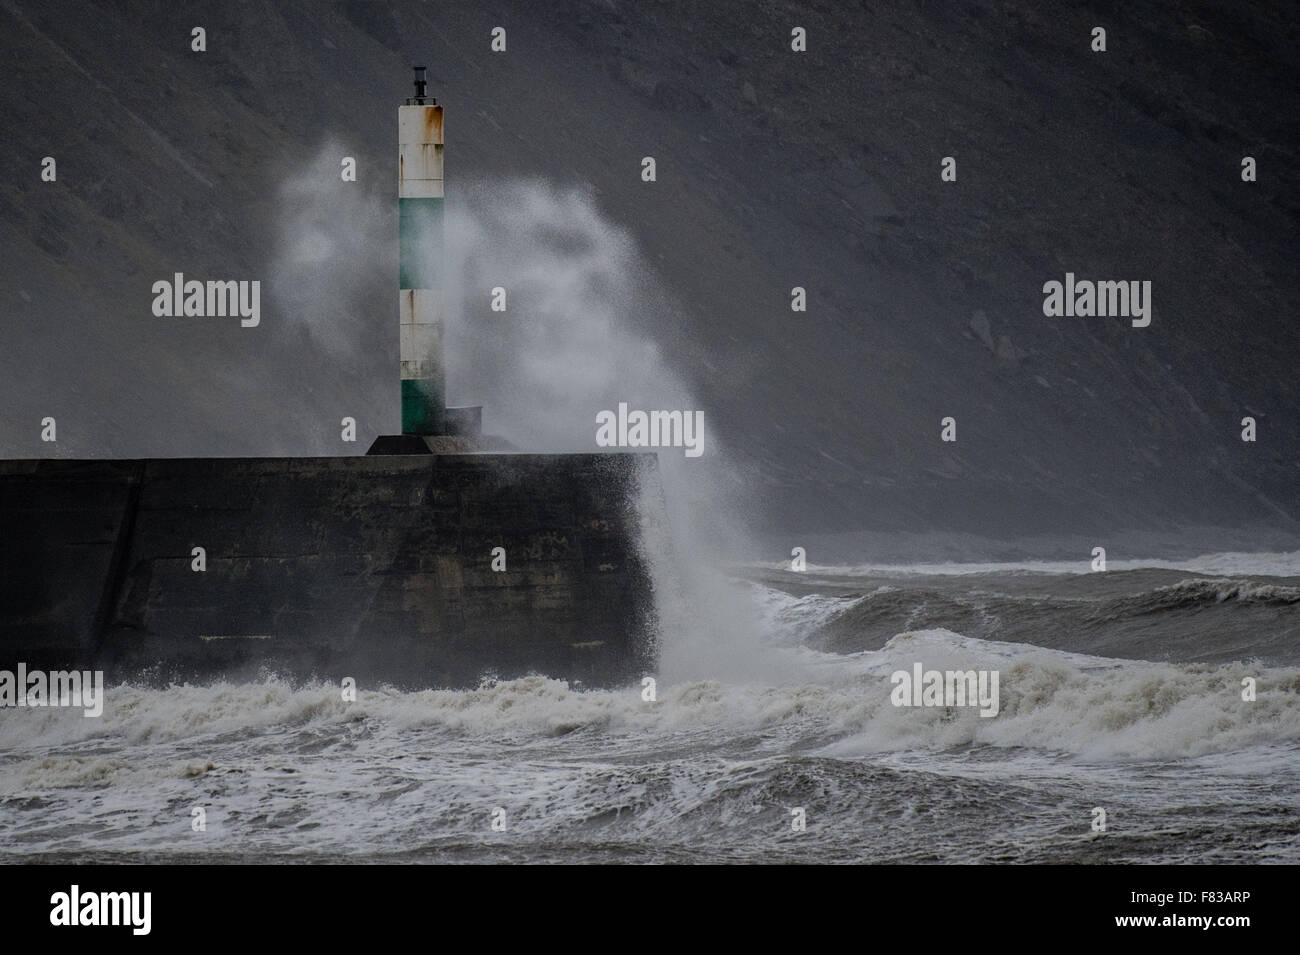 Aberystwyth Wales UK, Saturday 05 December 2015  The fourth named storm of the season, Storm Desmond, picks up strength and begins to batter the coast at Aberystwyth, west Wales  photo: © Keith Morris / Alamy Live  News Stock Photo